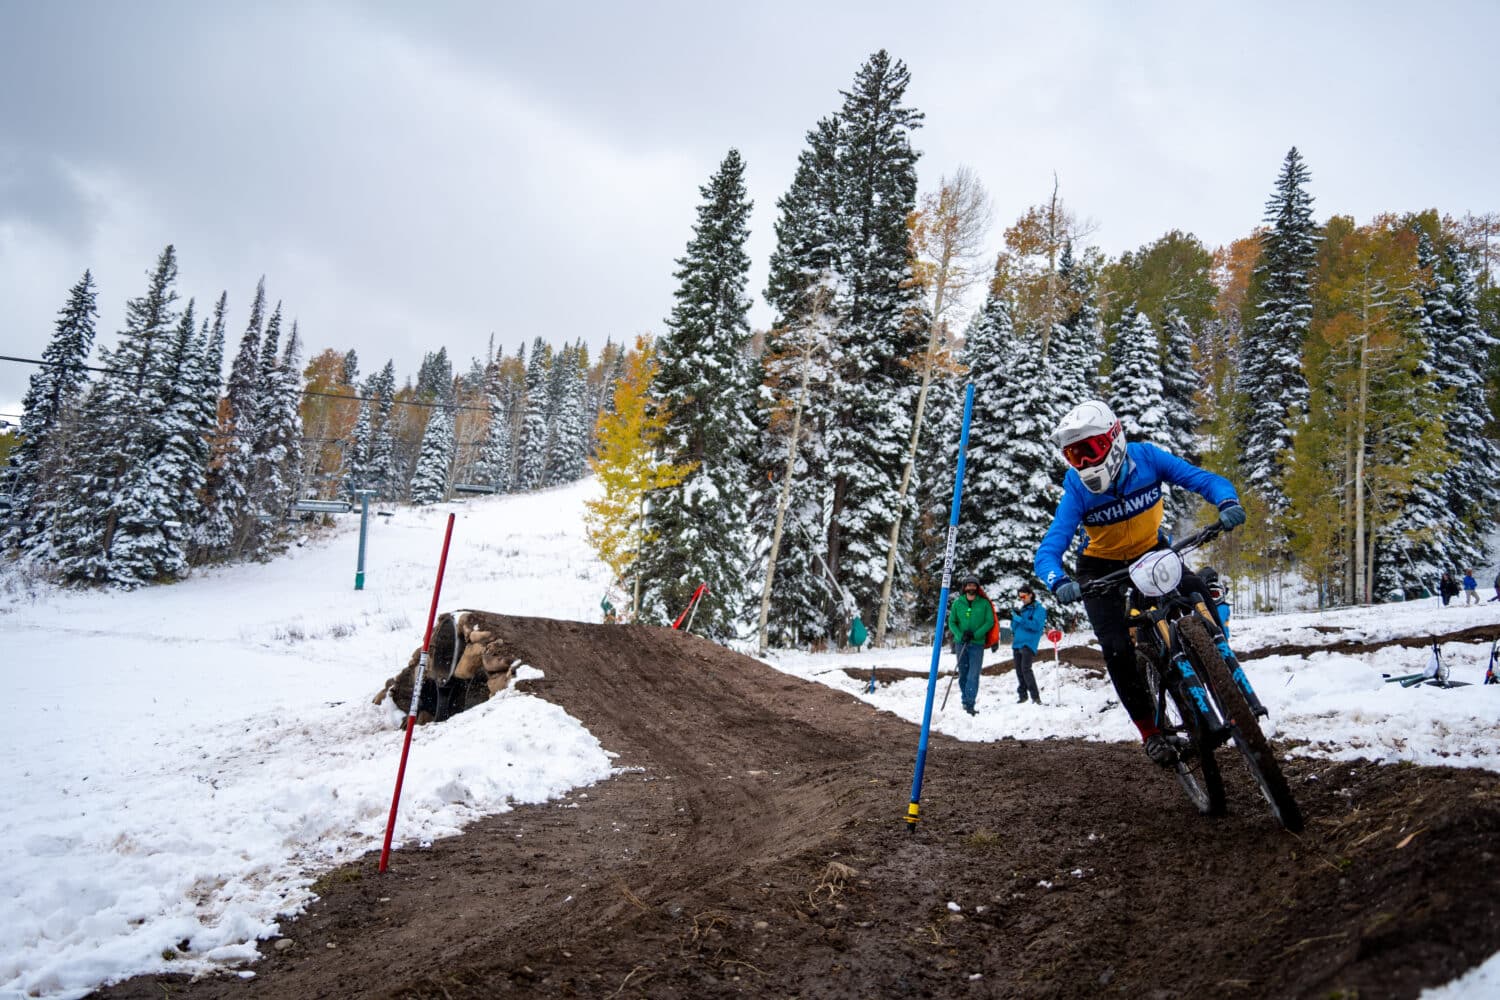 Fort Lewis College collegiate athlete races down the dual slalom course as a fresh blanket of snow covers the fall colored aspens